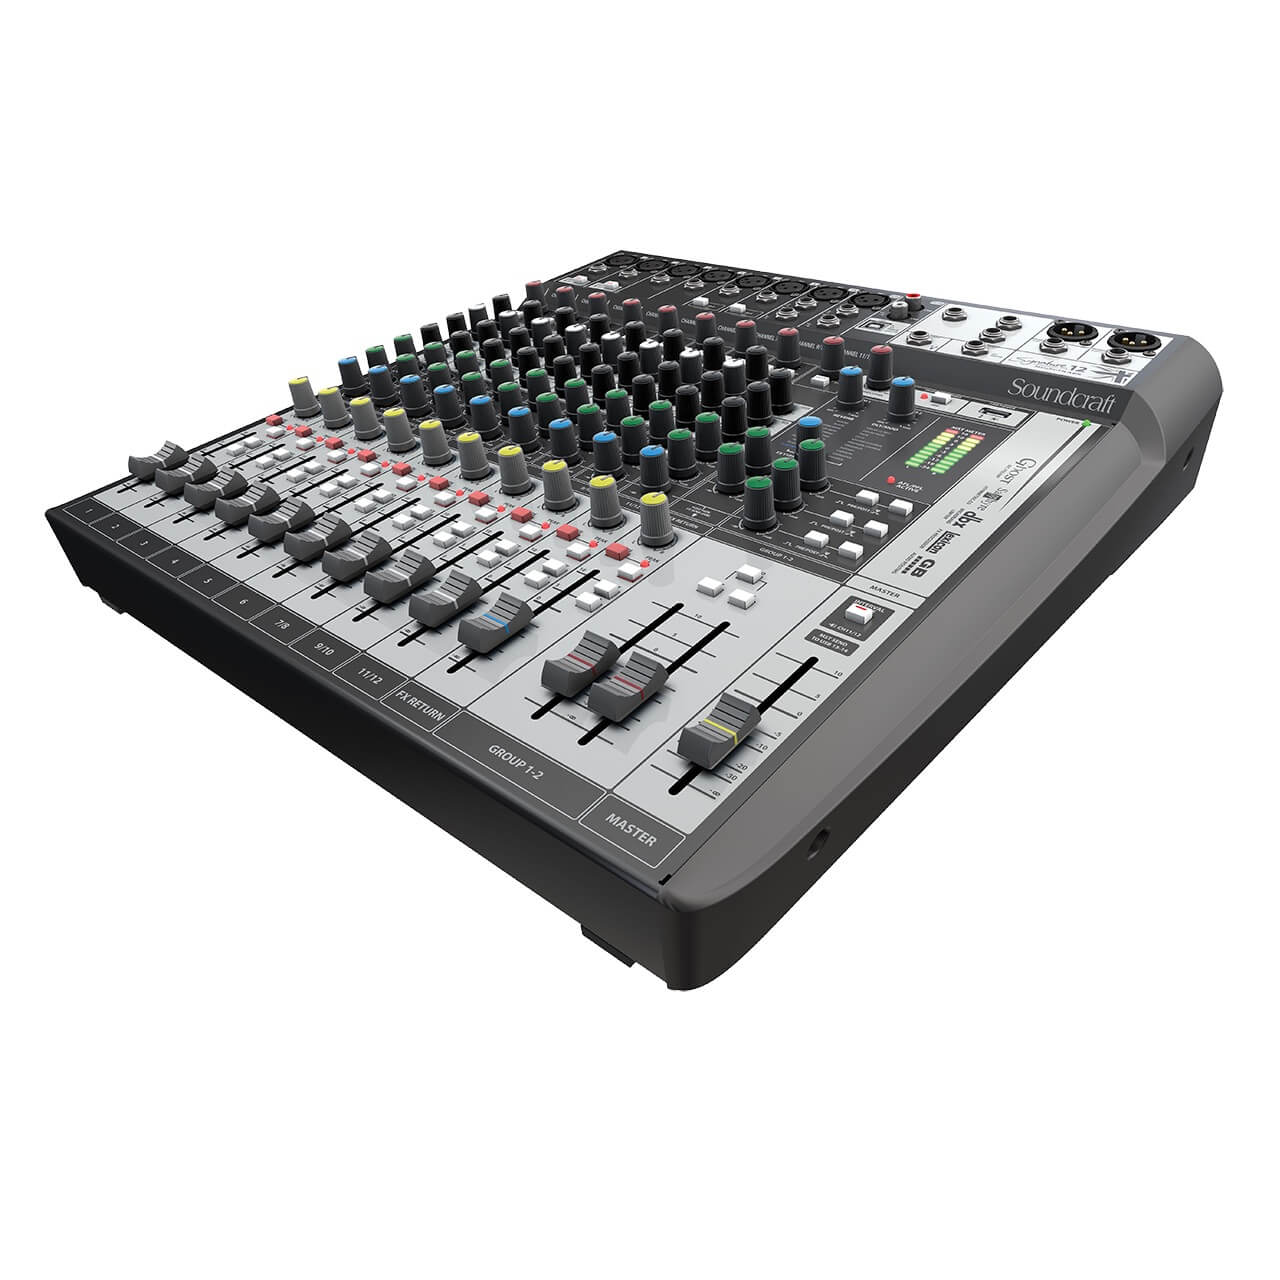 Soundcraft Signature 12MTK - 12-channel Analog Mixer with Lexicon Effects, right